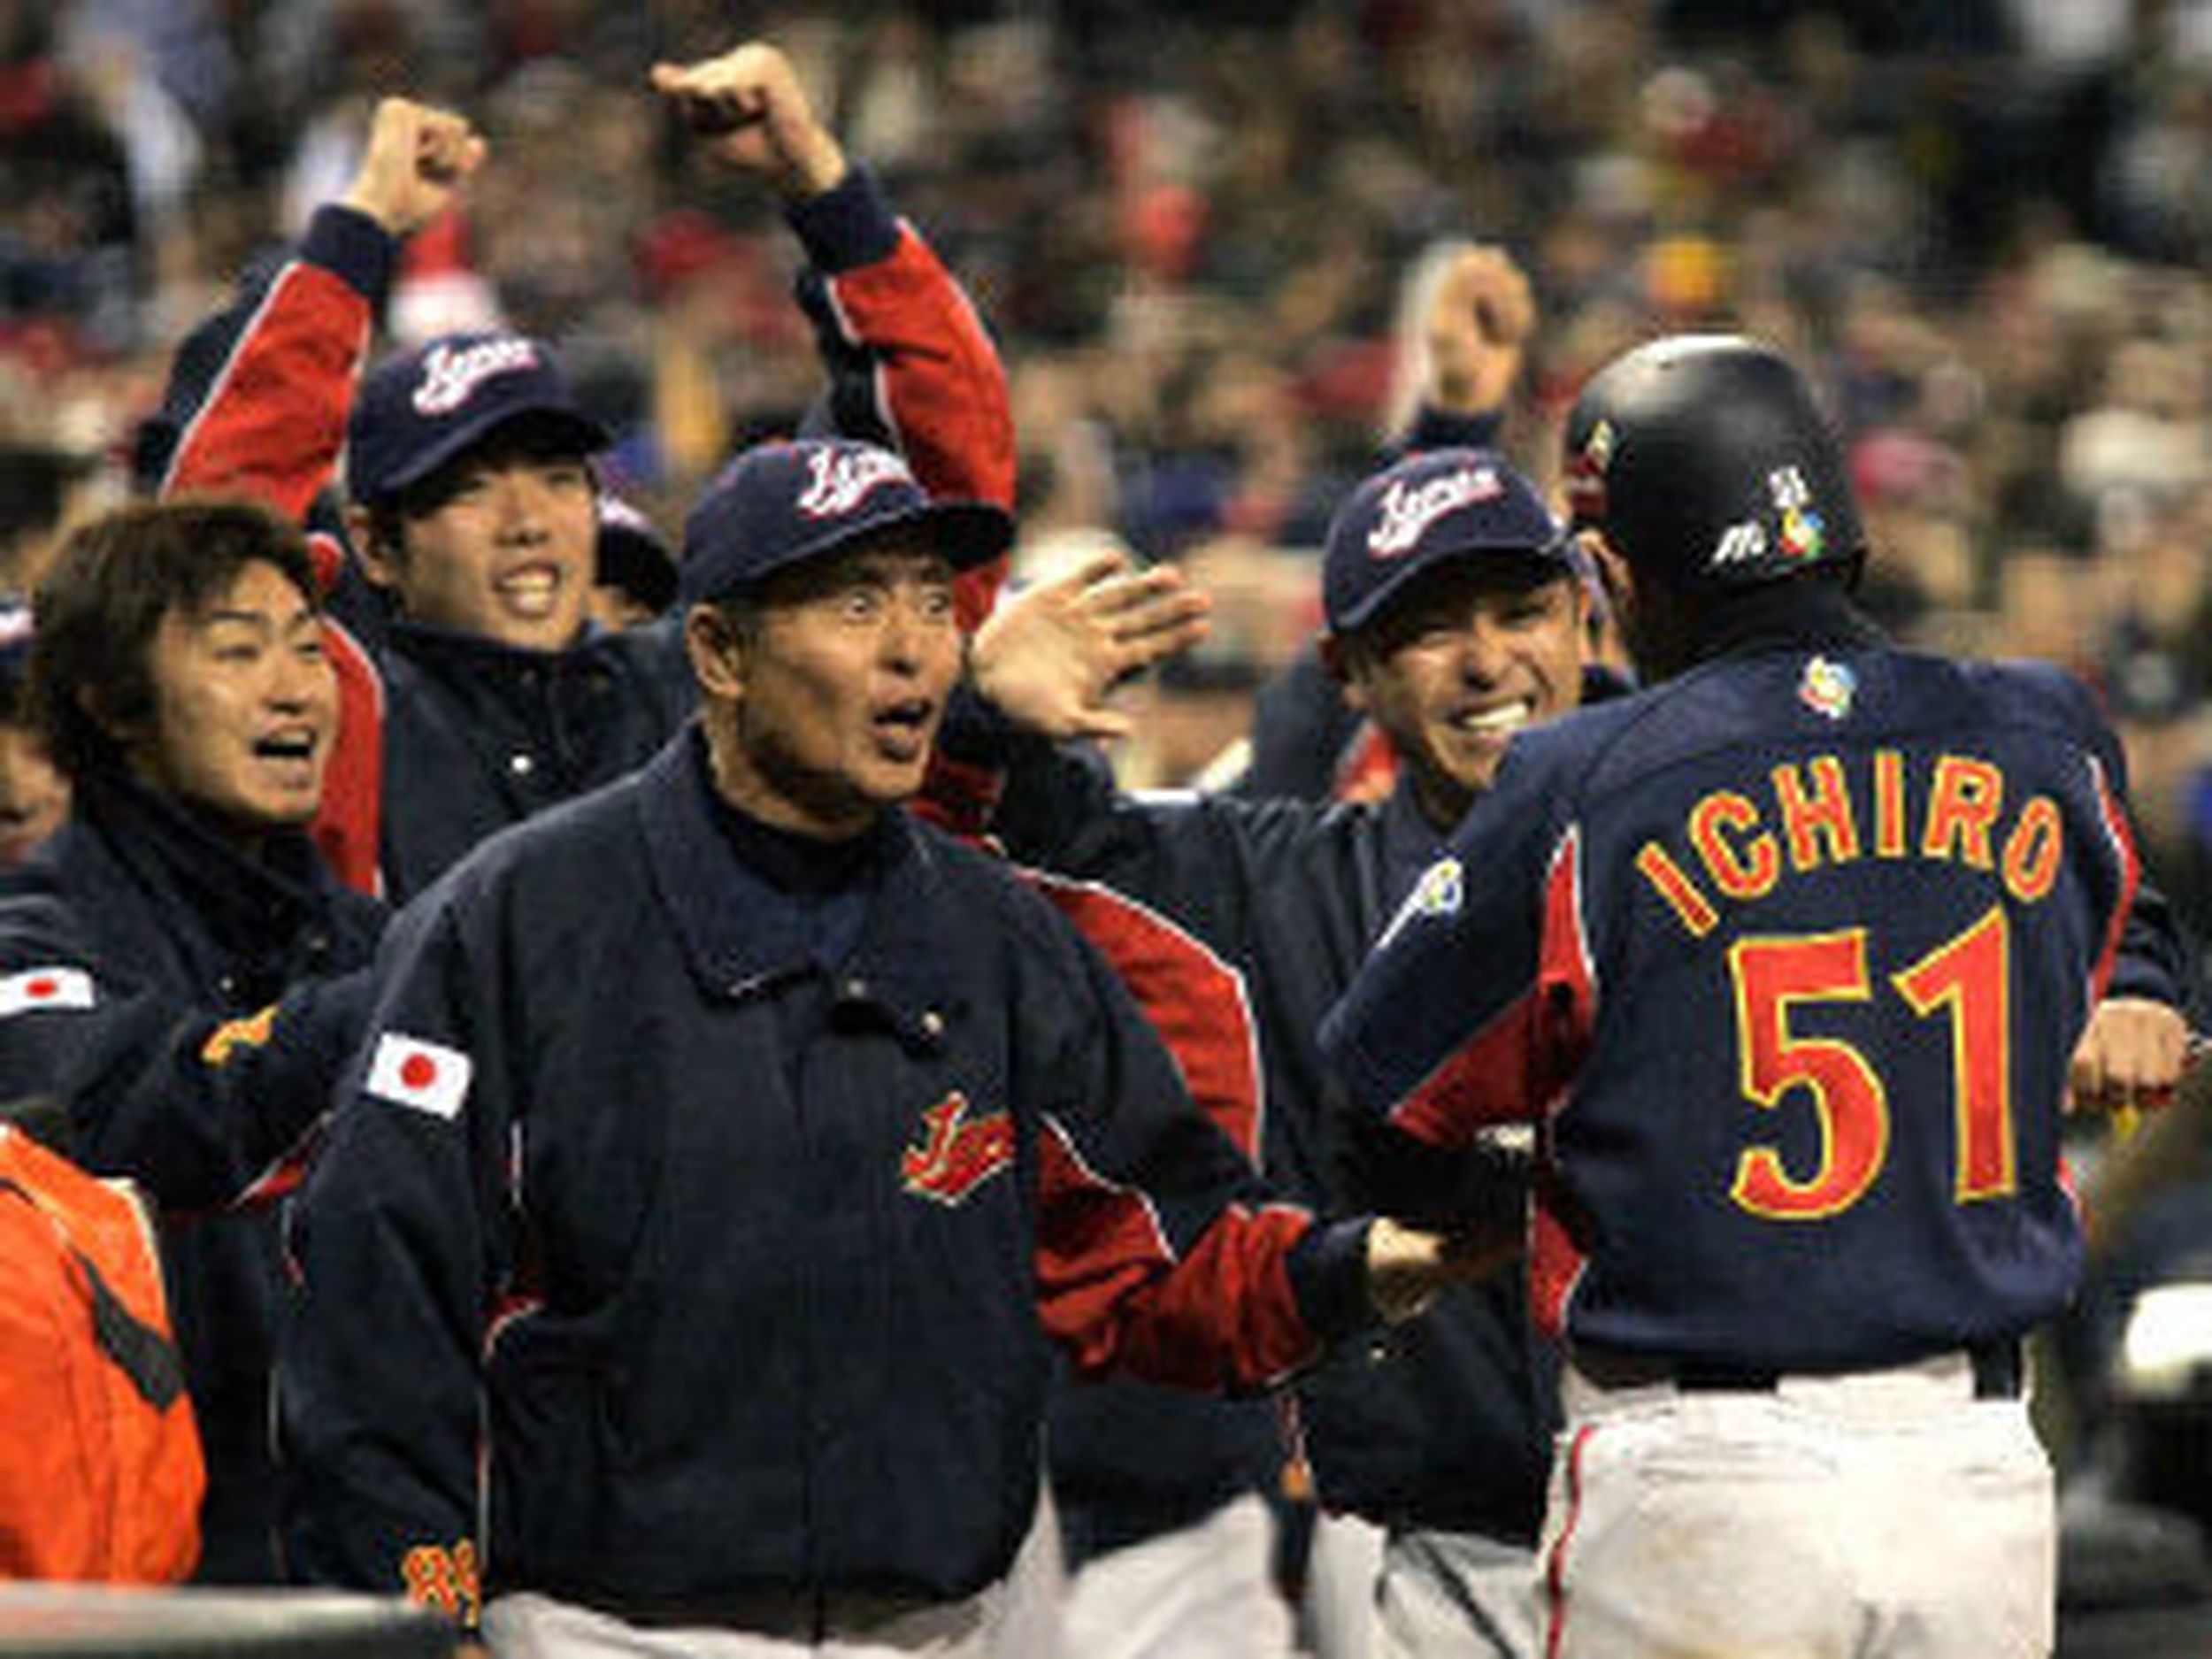 ODDS and EVENS] 2006 WBC Brought Joy, Excitement to Japan